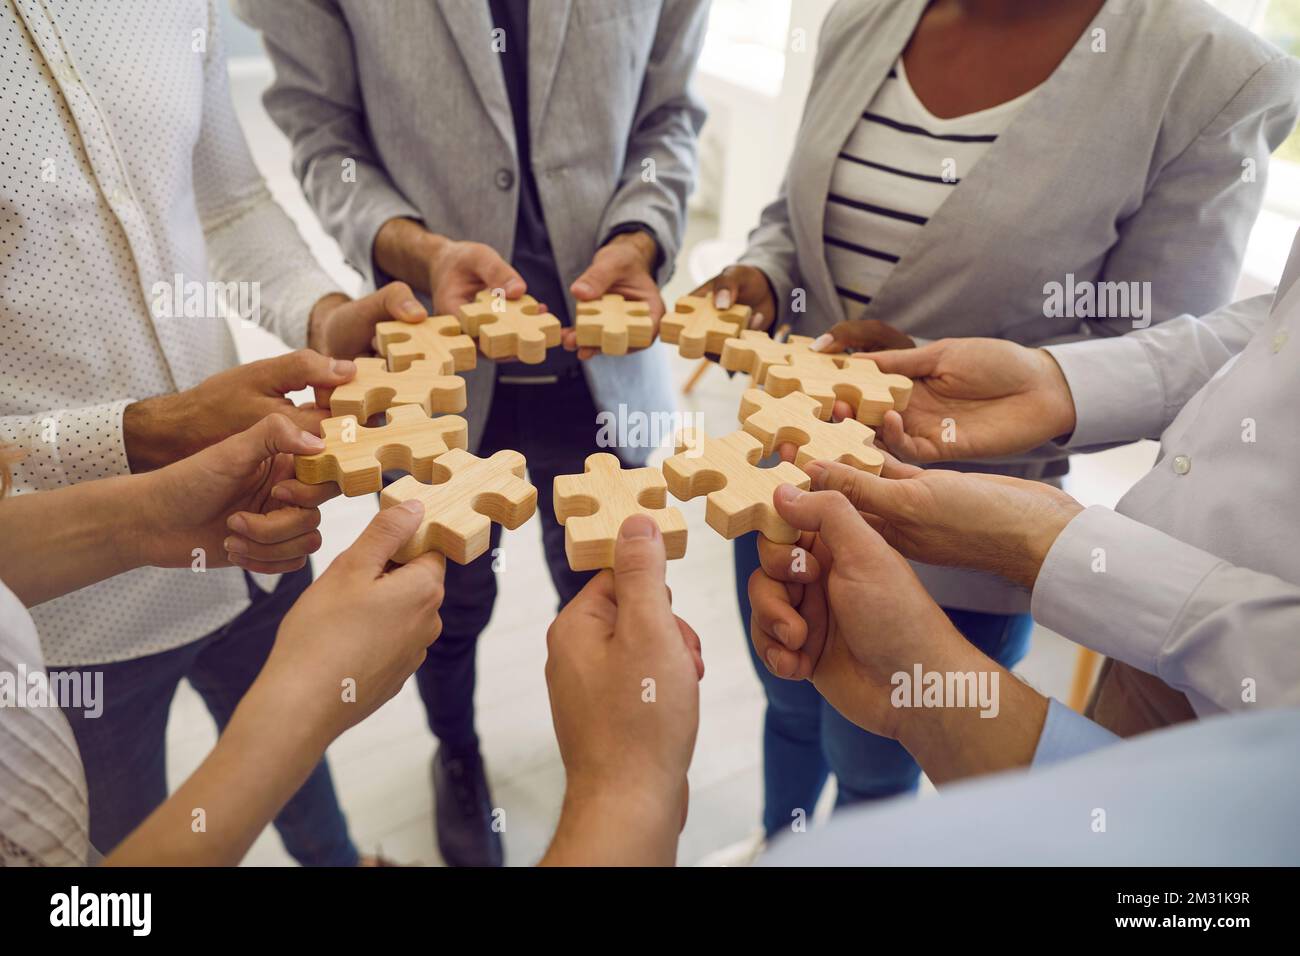 Group of men and women standing in circle and connecting identical wooden puzzle pieces. Stock Photo